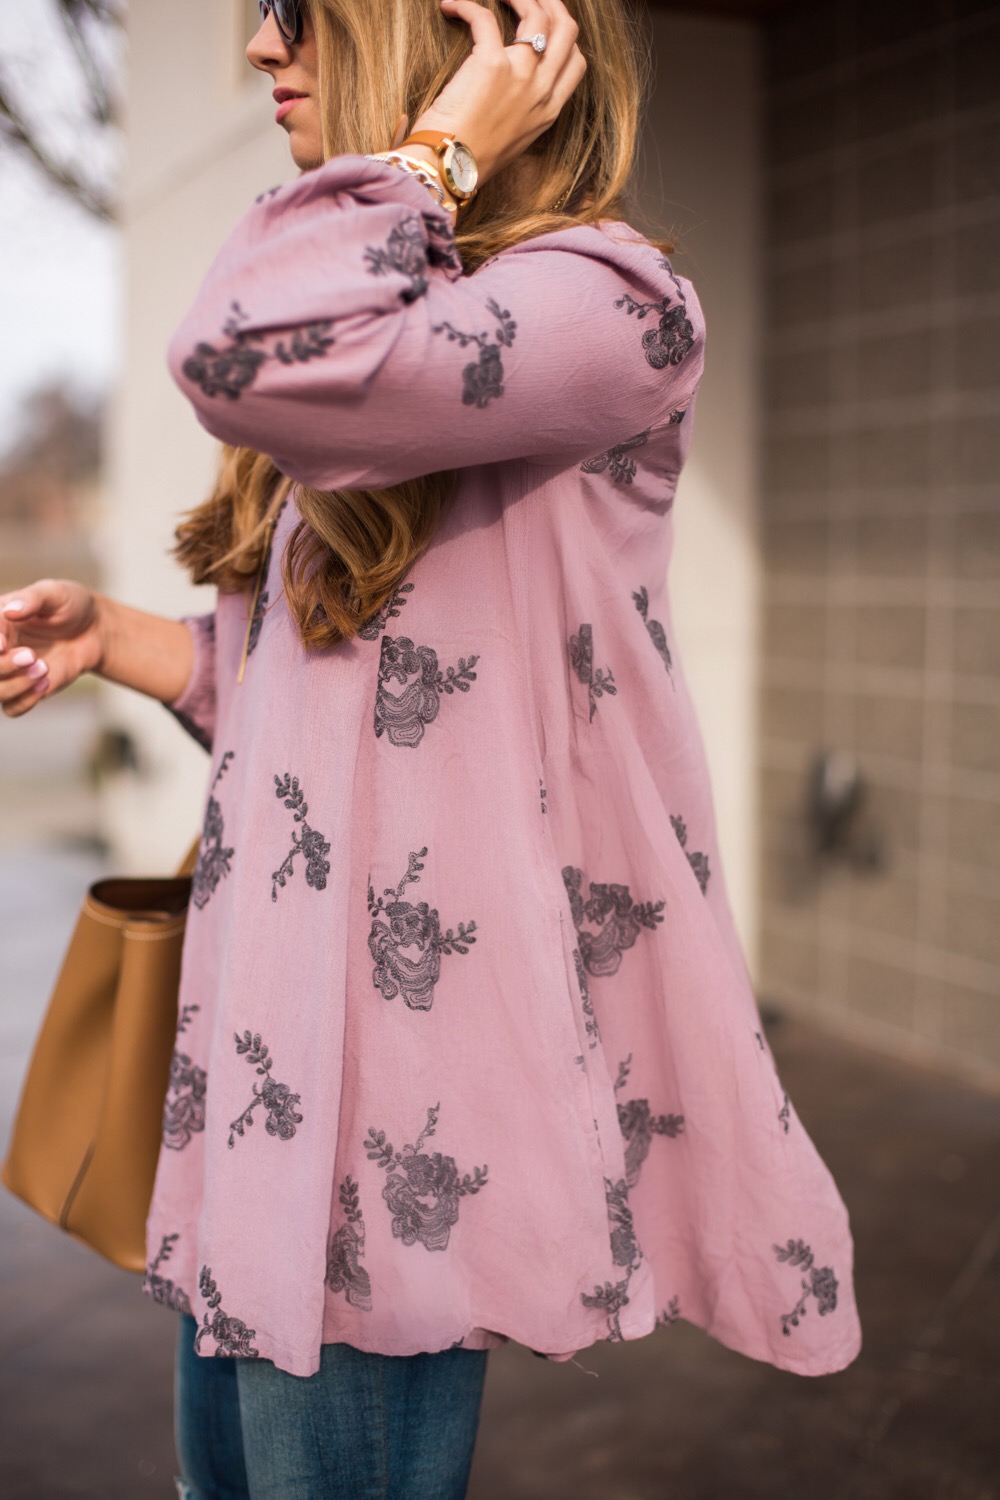 Free People Floral Tunic  The Teacher Diva: a Dallas Fashion Blog  featuring Beauty & Lifestyle